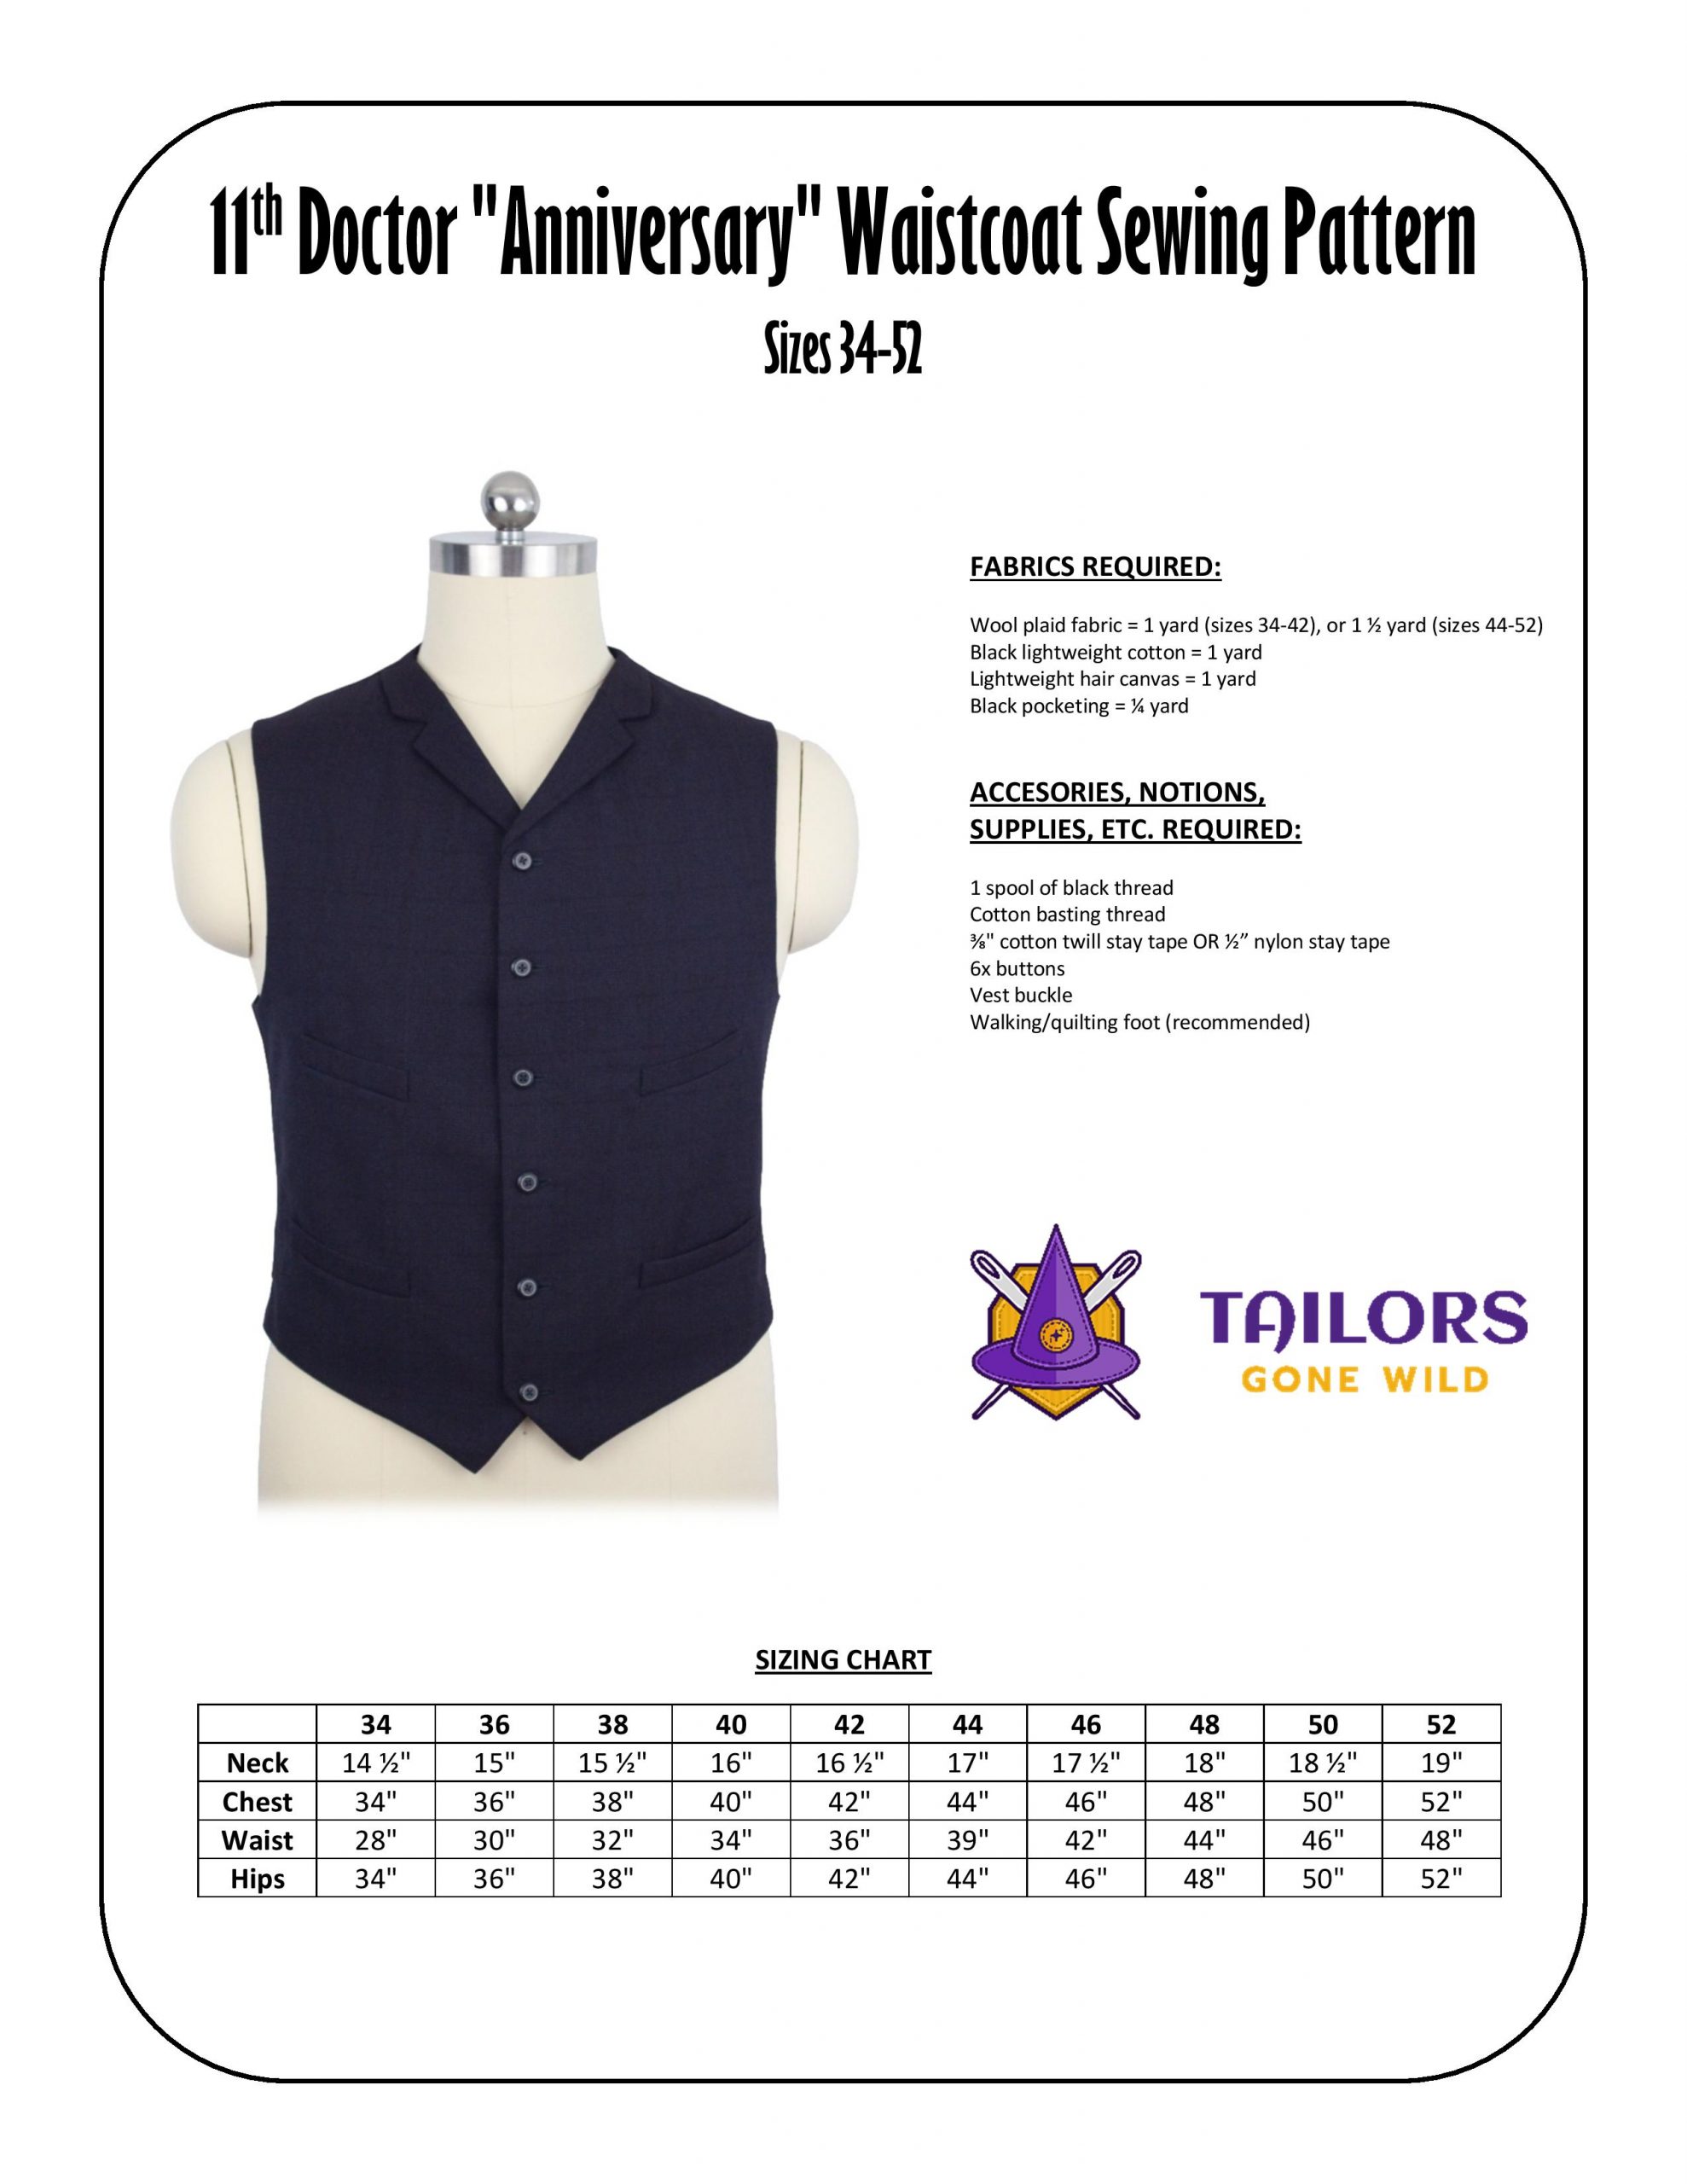 11th Doctor "anniversary" waistcoat sewing pattern - Tailors Gone Wild